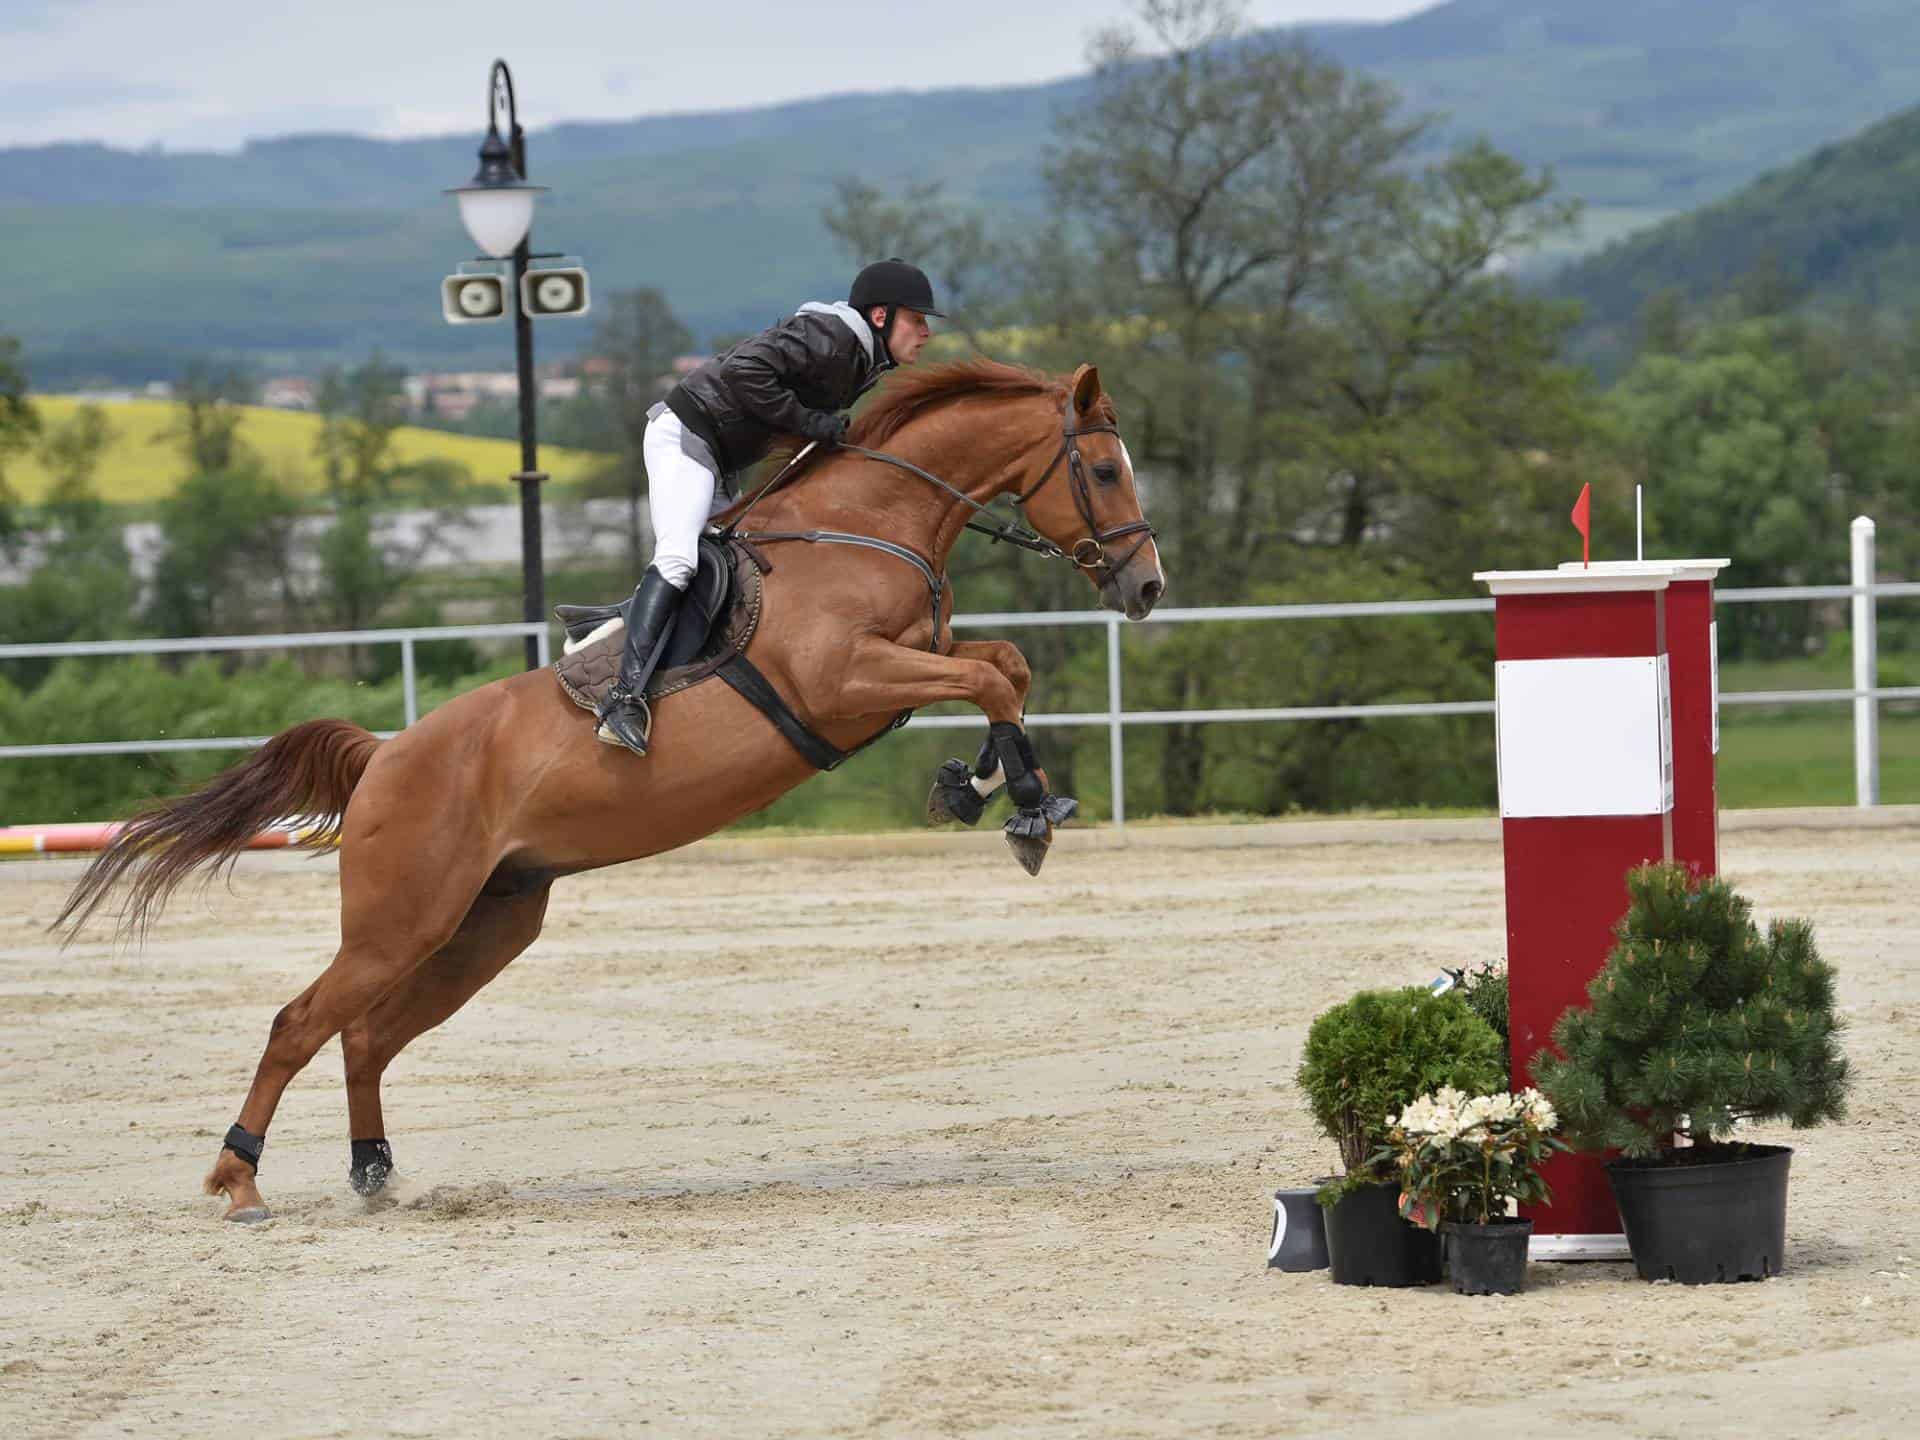 What major equestrian events are held in Europe?